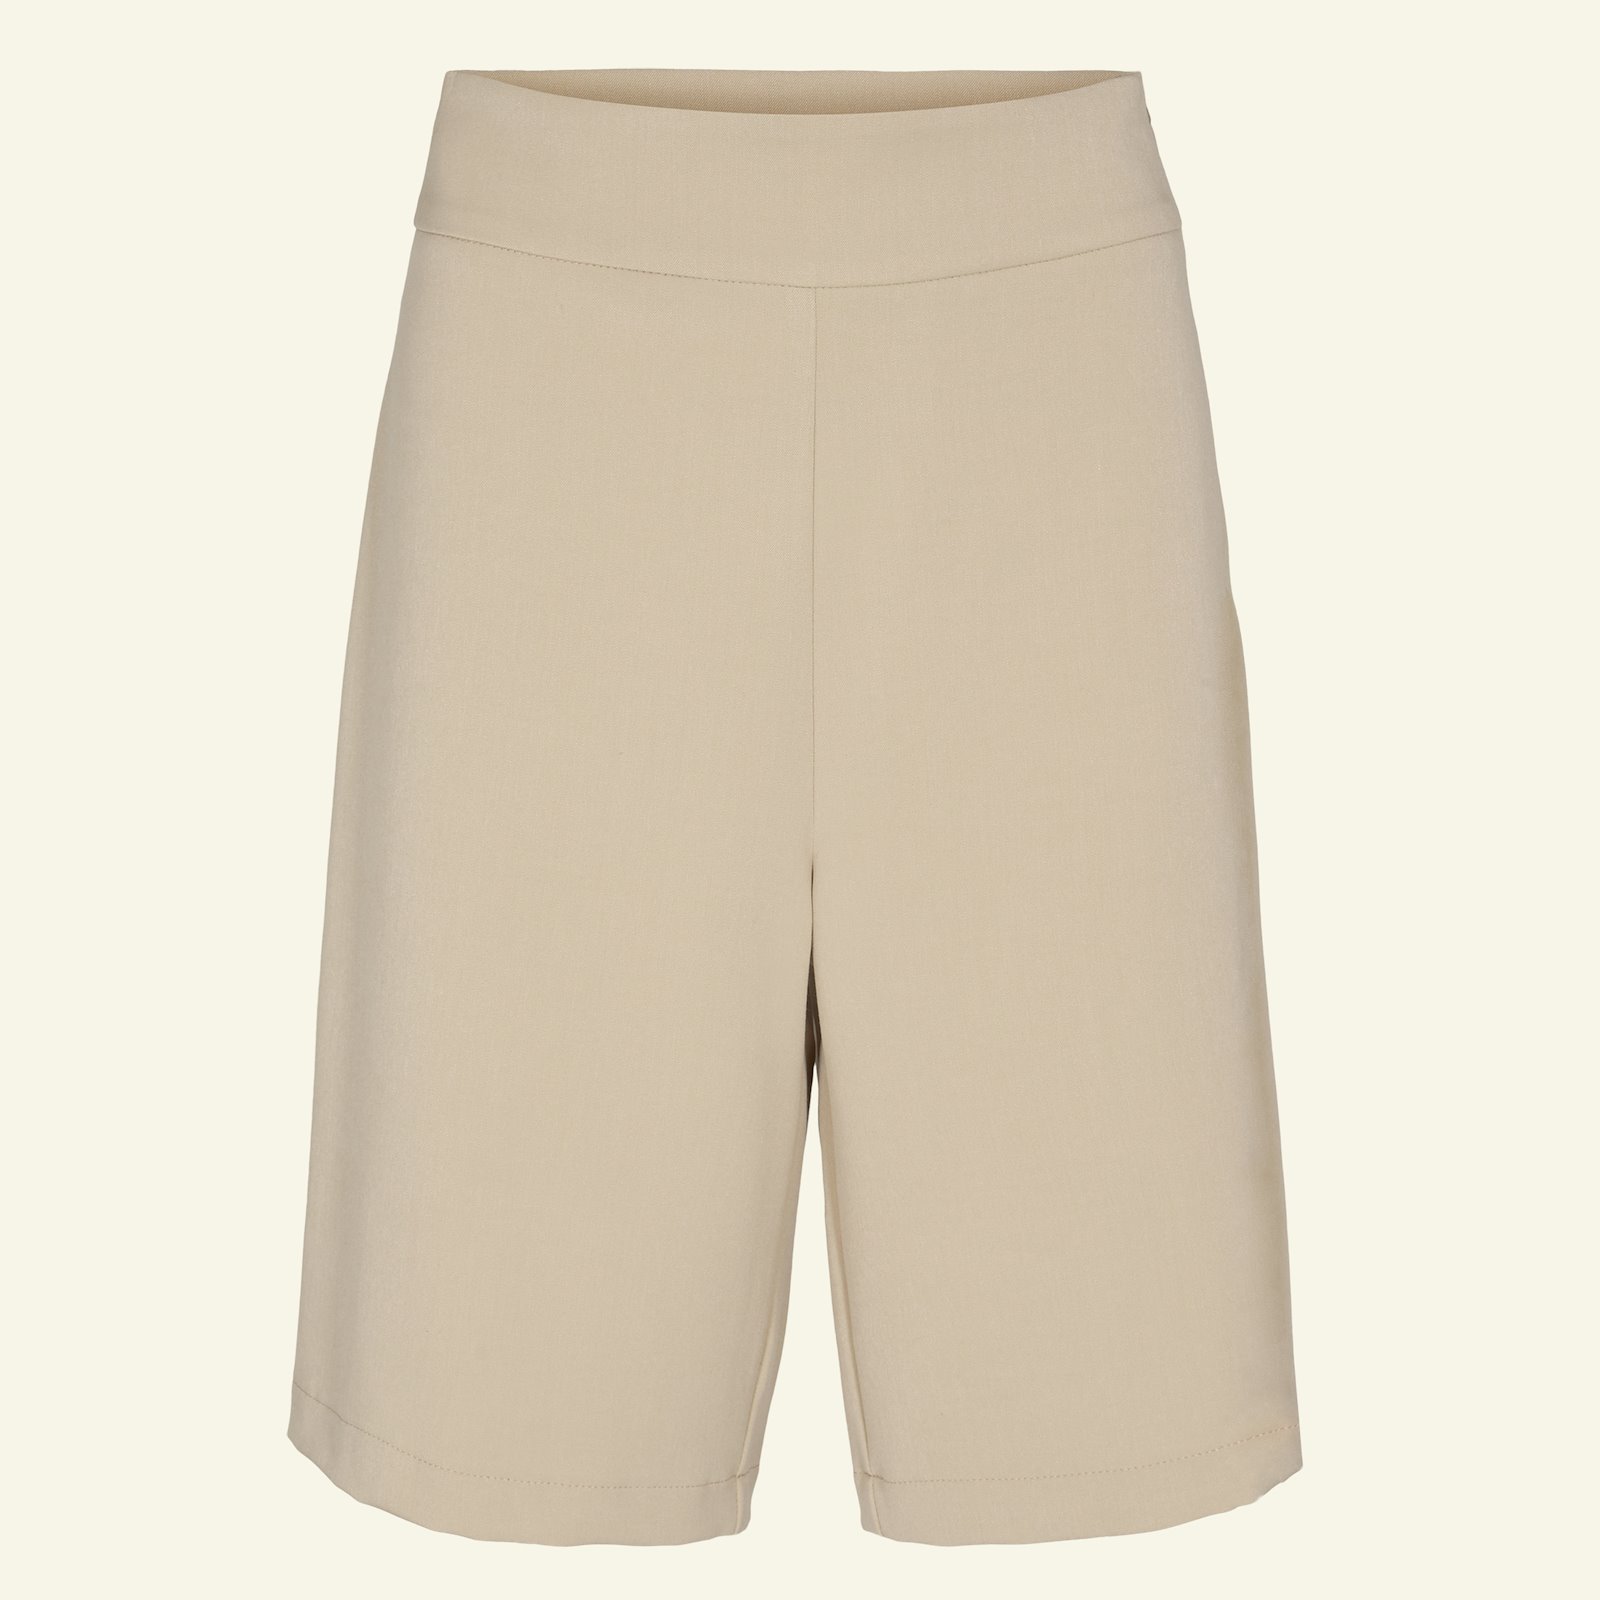 Highwaist and wide legs trousers, 32/4 p20052_460857_sskit